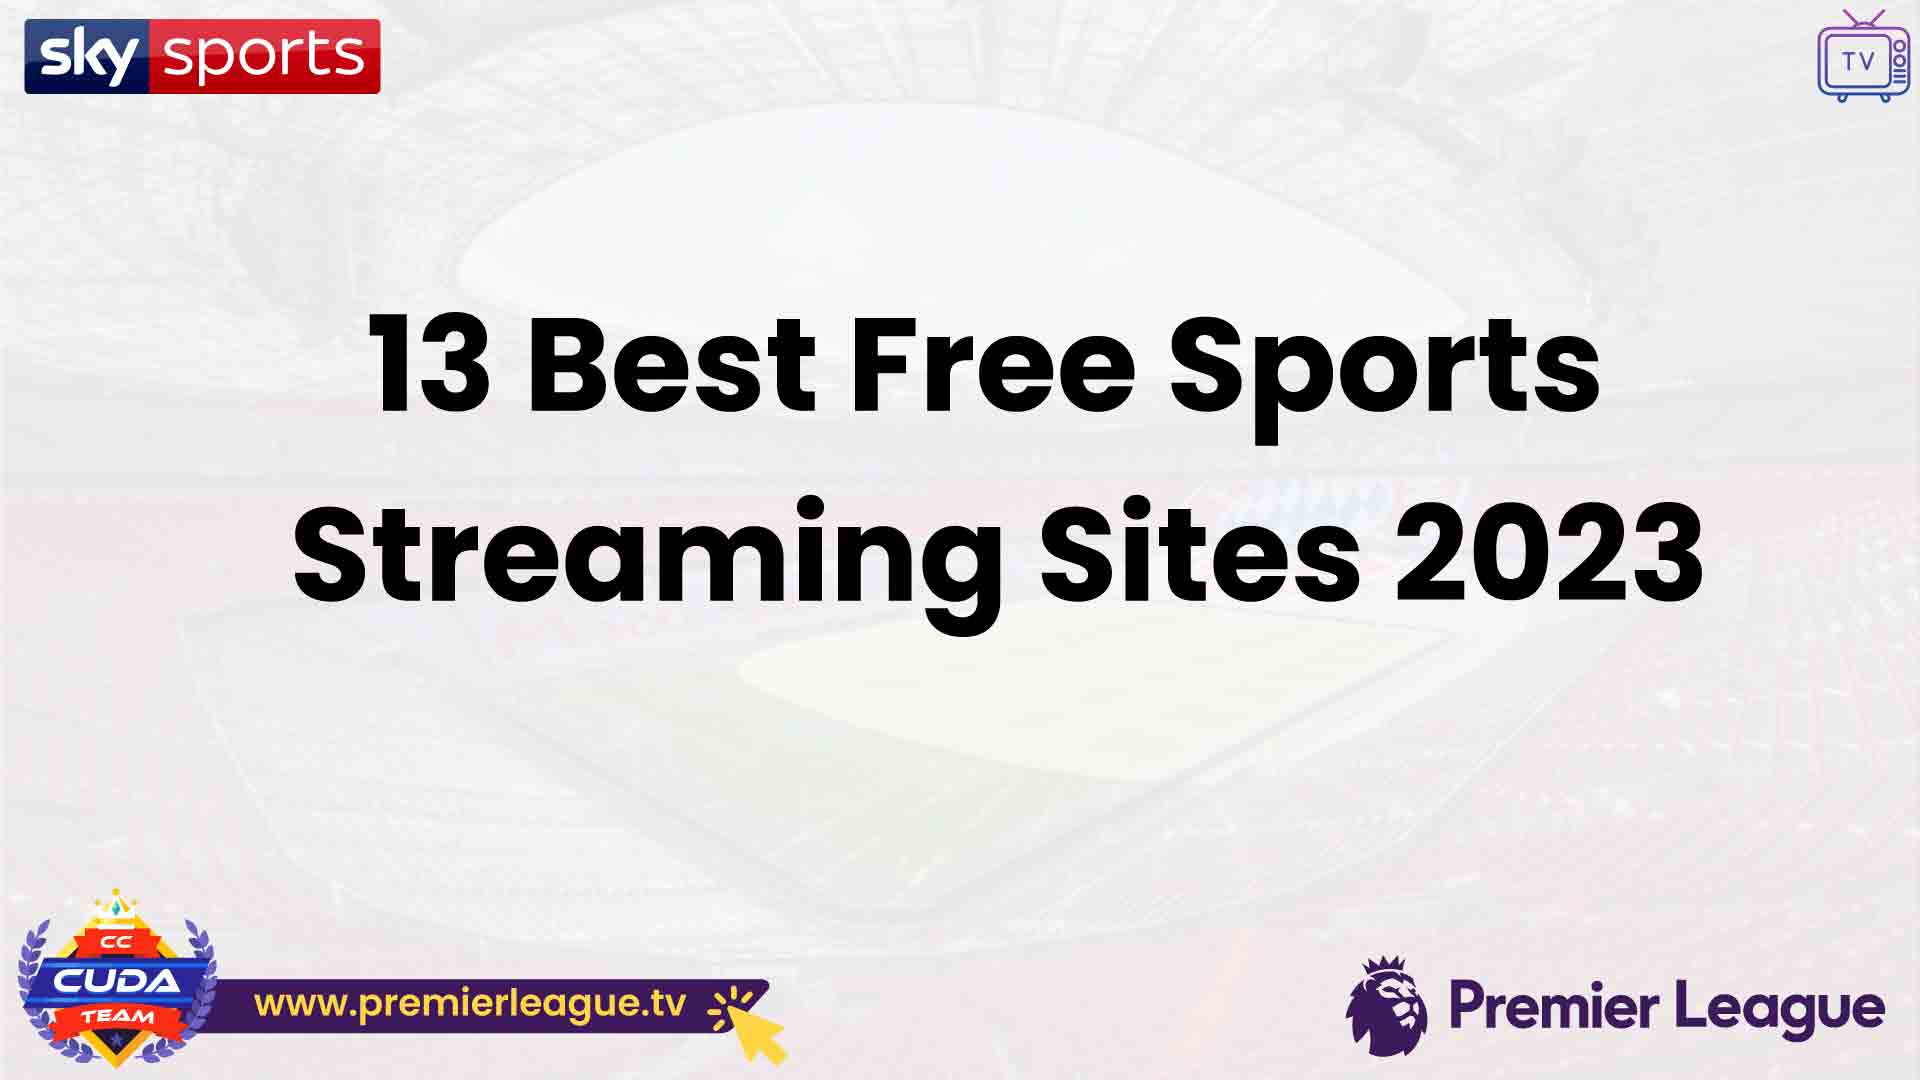 13 Best Free Sports Streaming Sites 2023